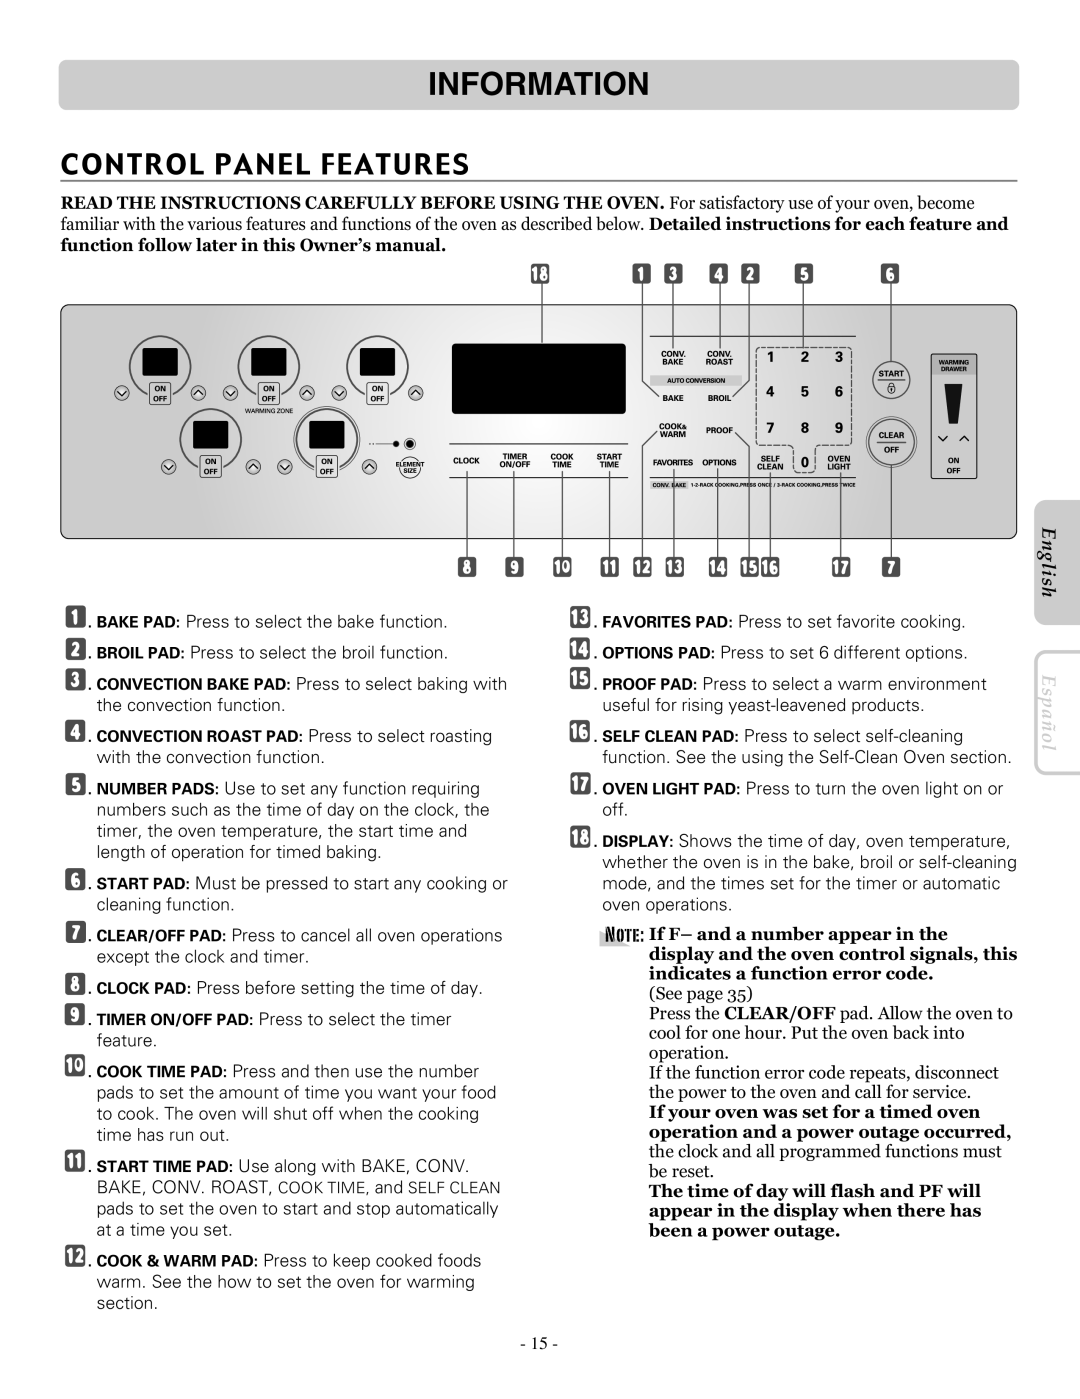 LG Electronics LRE30757SW, LRE30757ST, LRE30757SB owner manual Control Panel Features, Information, English, Español 